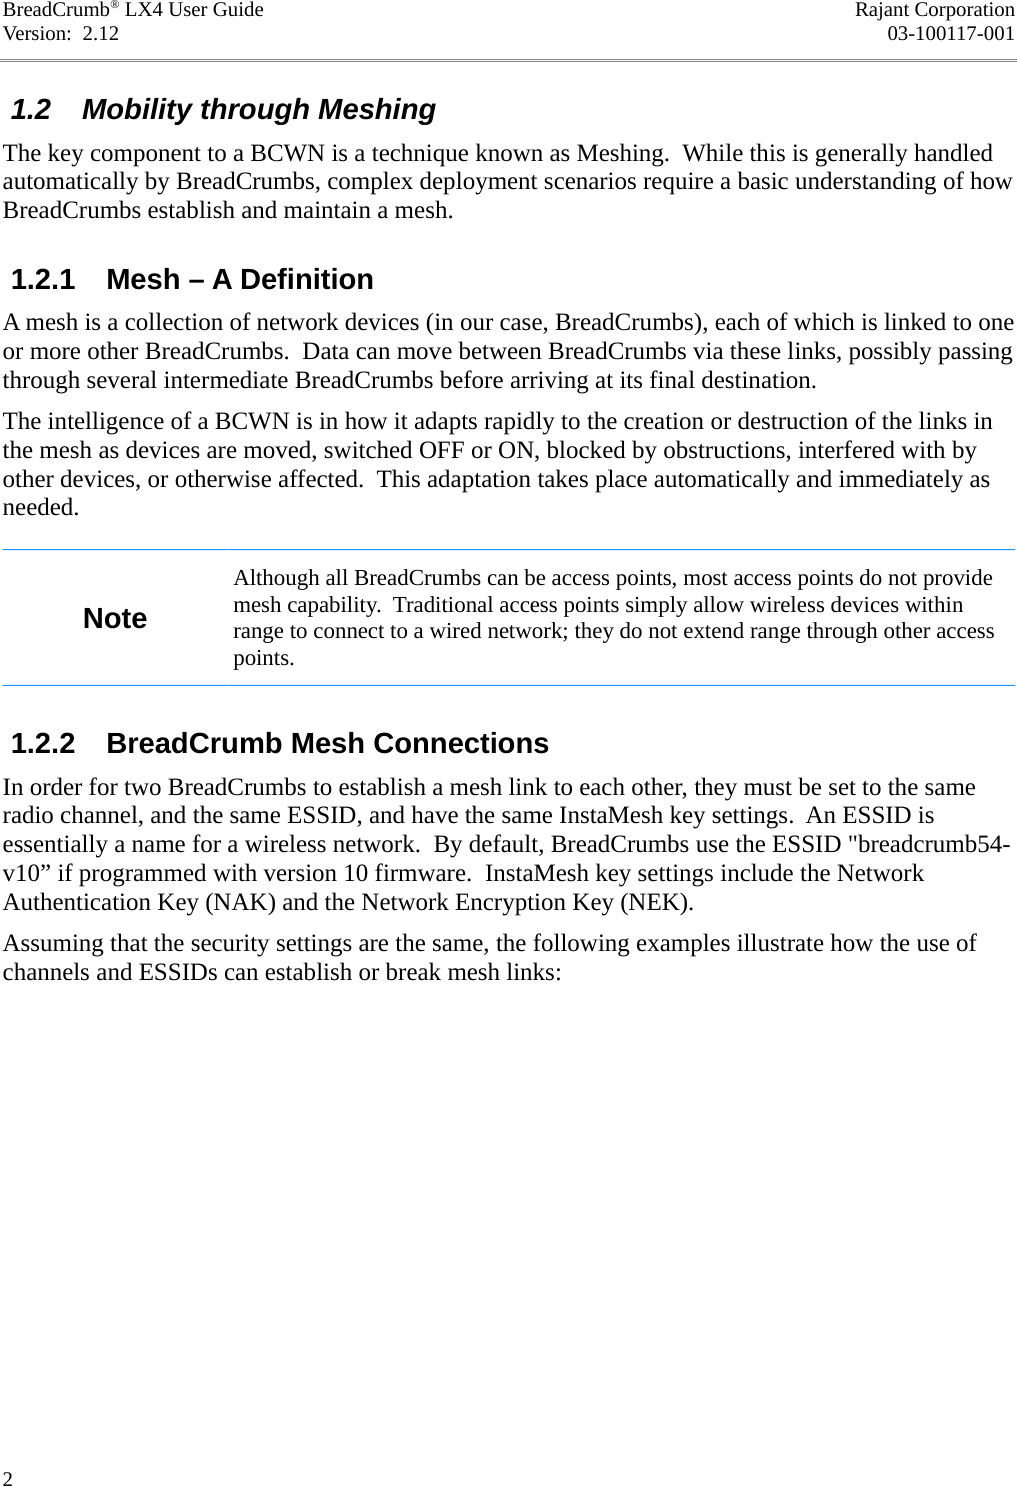 BreadCrumb® LX4 User Guide Rajant CorporationVersion:  2.12 03-100117-001 1.2  Mobility through MeshingThe key component to a BCWN is a technique known as Meshing.  While this is generally handled automatically by BreadCrumbs, complex deployment scenarios require a basic understanding of how BreadCrumbs establish and maintain a mesh. 1.2.1  Mesh – A DefinitionA mesh is a collection of network devices (in our case, BreadCrumbs), each of which is linked to one or more other BreadCrumbs.  Data can move between BreadCrumbs via these links, possibly passing through several intermediate BreadCrumbs before arriving at its final destination.The intelligence of a BCWN is in how it adapts rapidly to the creation or destruction of the links in the mesh as devices are moved, switched OFF or ON, blocked by obstructions, interfered with by other devices, or otherwise affected.  This adaptation takes place automatically and immediately as needed.NoteAlthough all BreadCrumbs can be access points, most access points do not provide mesh capability.  Traditional access points simply allow wireless devices within range to connect to a wired network; they do not extend range through other access points. 1.2.2  BreadCrumb Mesh ConnectionsIn order for two BreadCrumbs to establish a mesh link to each other, they must be set to the same radio channel, and the same ESSID, and have the same InstaMesh key settings.  An ESSID is essentially a name for a wireless network.  By default, BreadCrumbs use the ESSID &quot;breadcrumb54-v10” if programmed with version 10 firmware.  InstaMesh key settings include the Network Authentication Key (NAK) and the Network Encryption Key (NEK).Assuming that the security settings are the same, the following examples illustrate how the use of channels and ESSIDs can establish or break mesh links:2